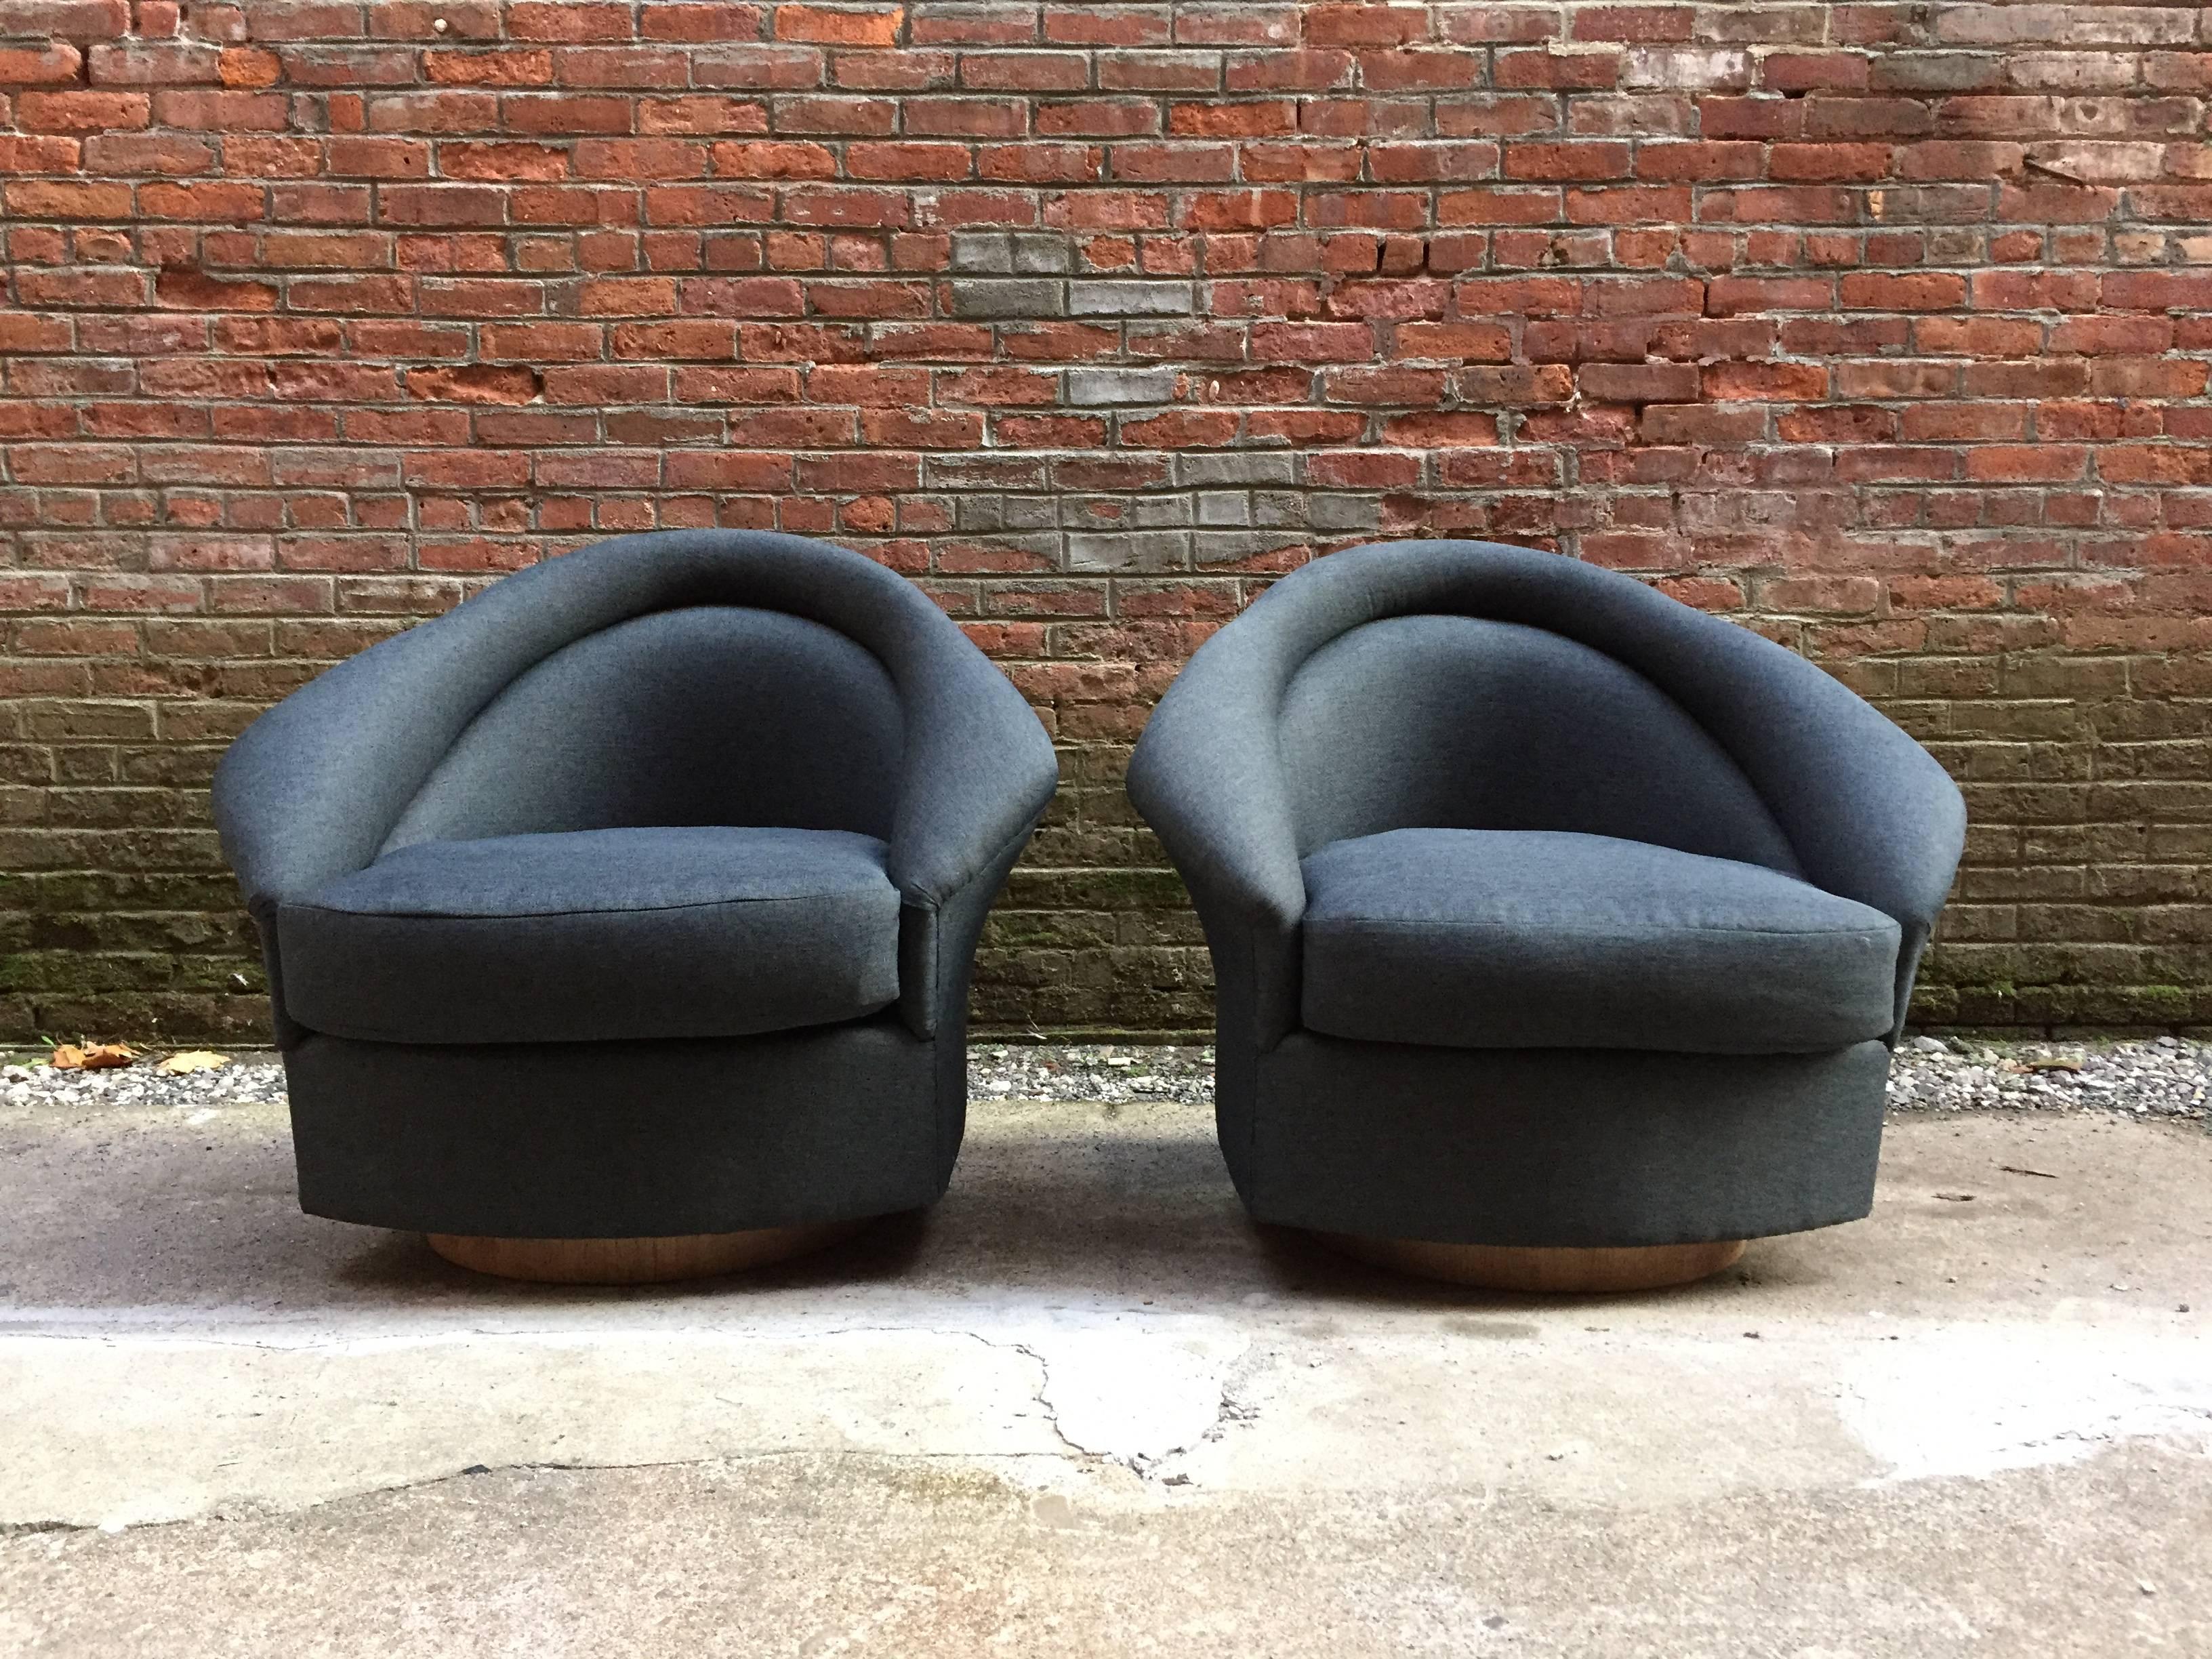 Re-upholstered in a Knoll charcoal grey fabric with round walnut bases. Very nice flared arm detail.